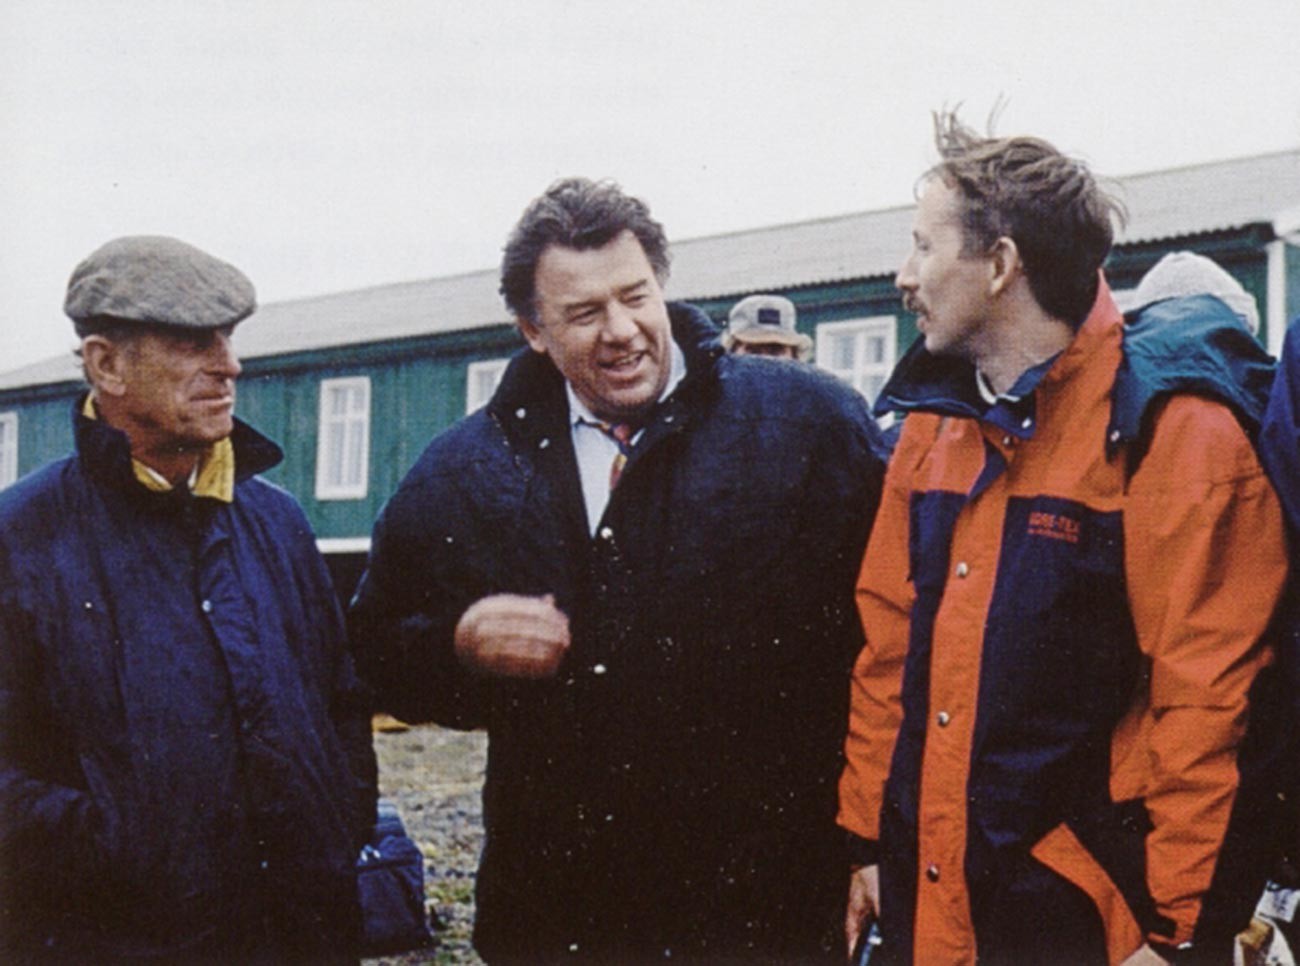 Prince Philip (on the left) and Victor Nikiforov (on the right). Nikiforov currently works as the Conservation Director at the Tigrus Conservation Fund.